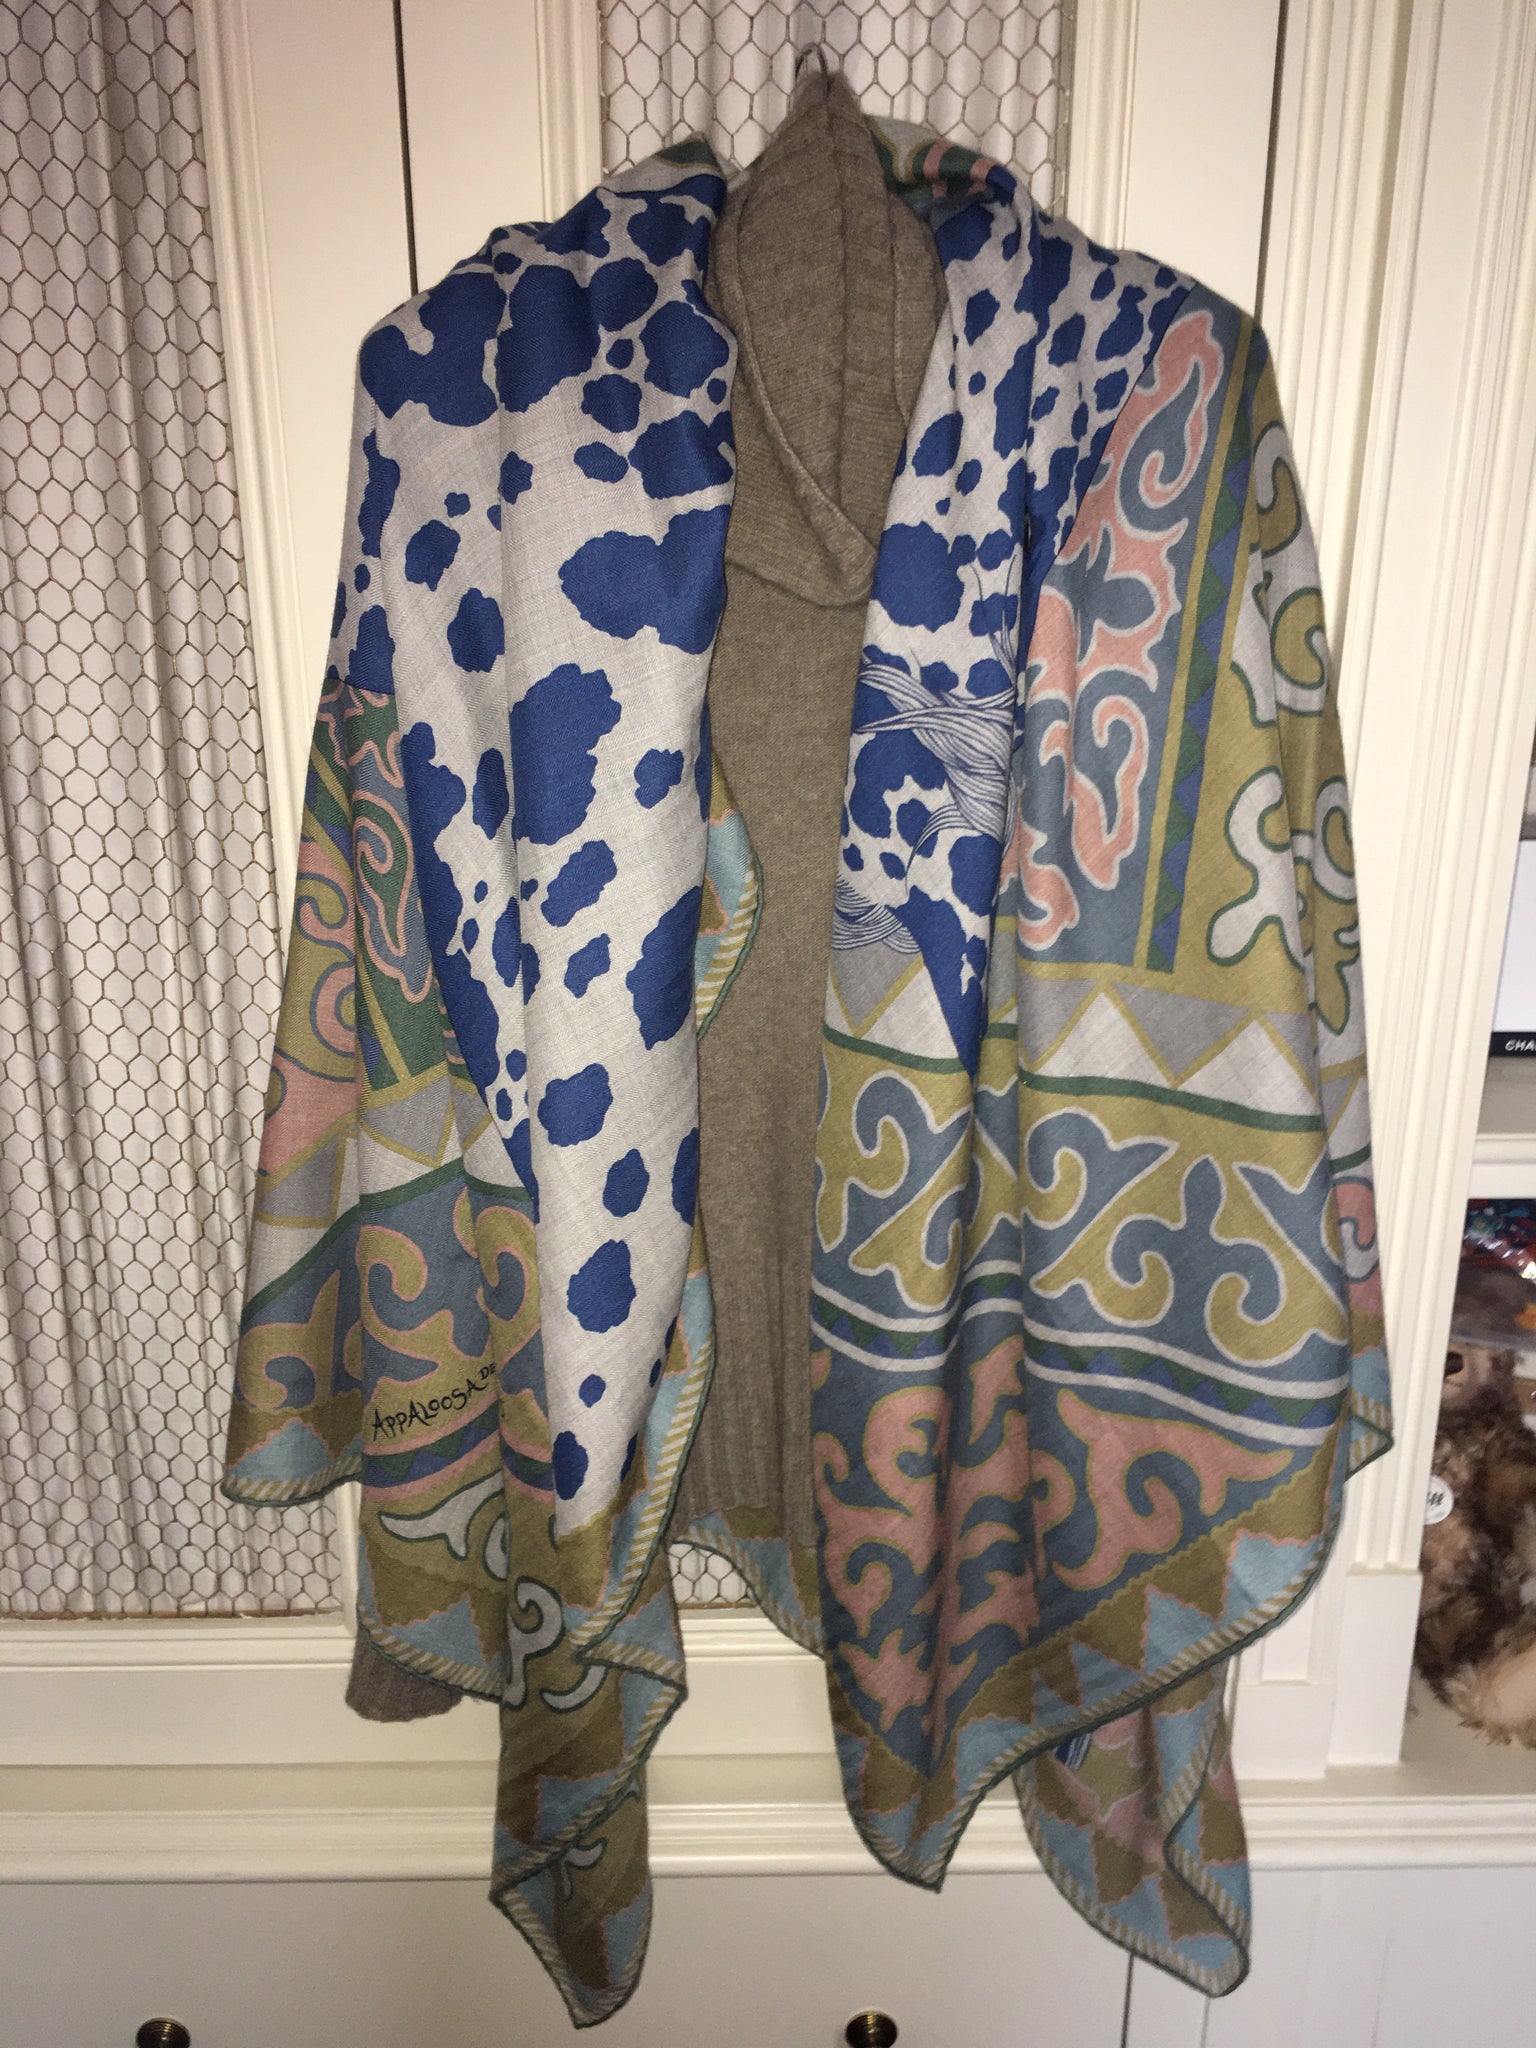 Hermes Cashmere/Silk Shawl “Appaloosa des Steppes” by Alice Shirley 14 ...